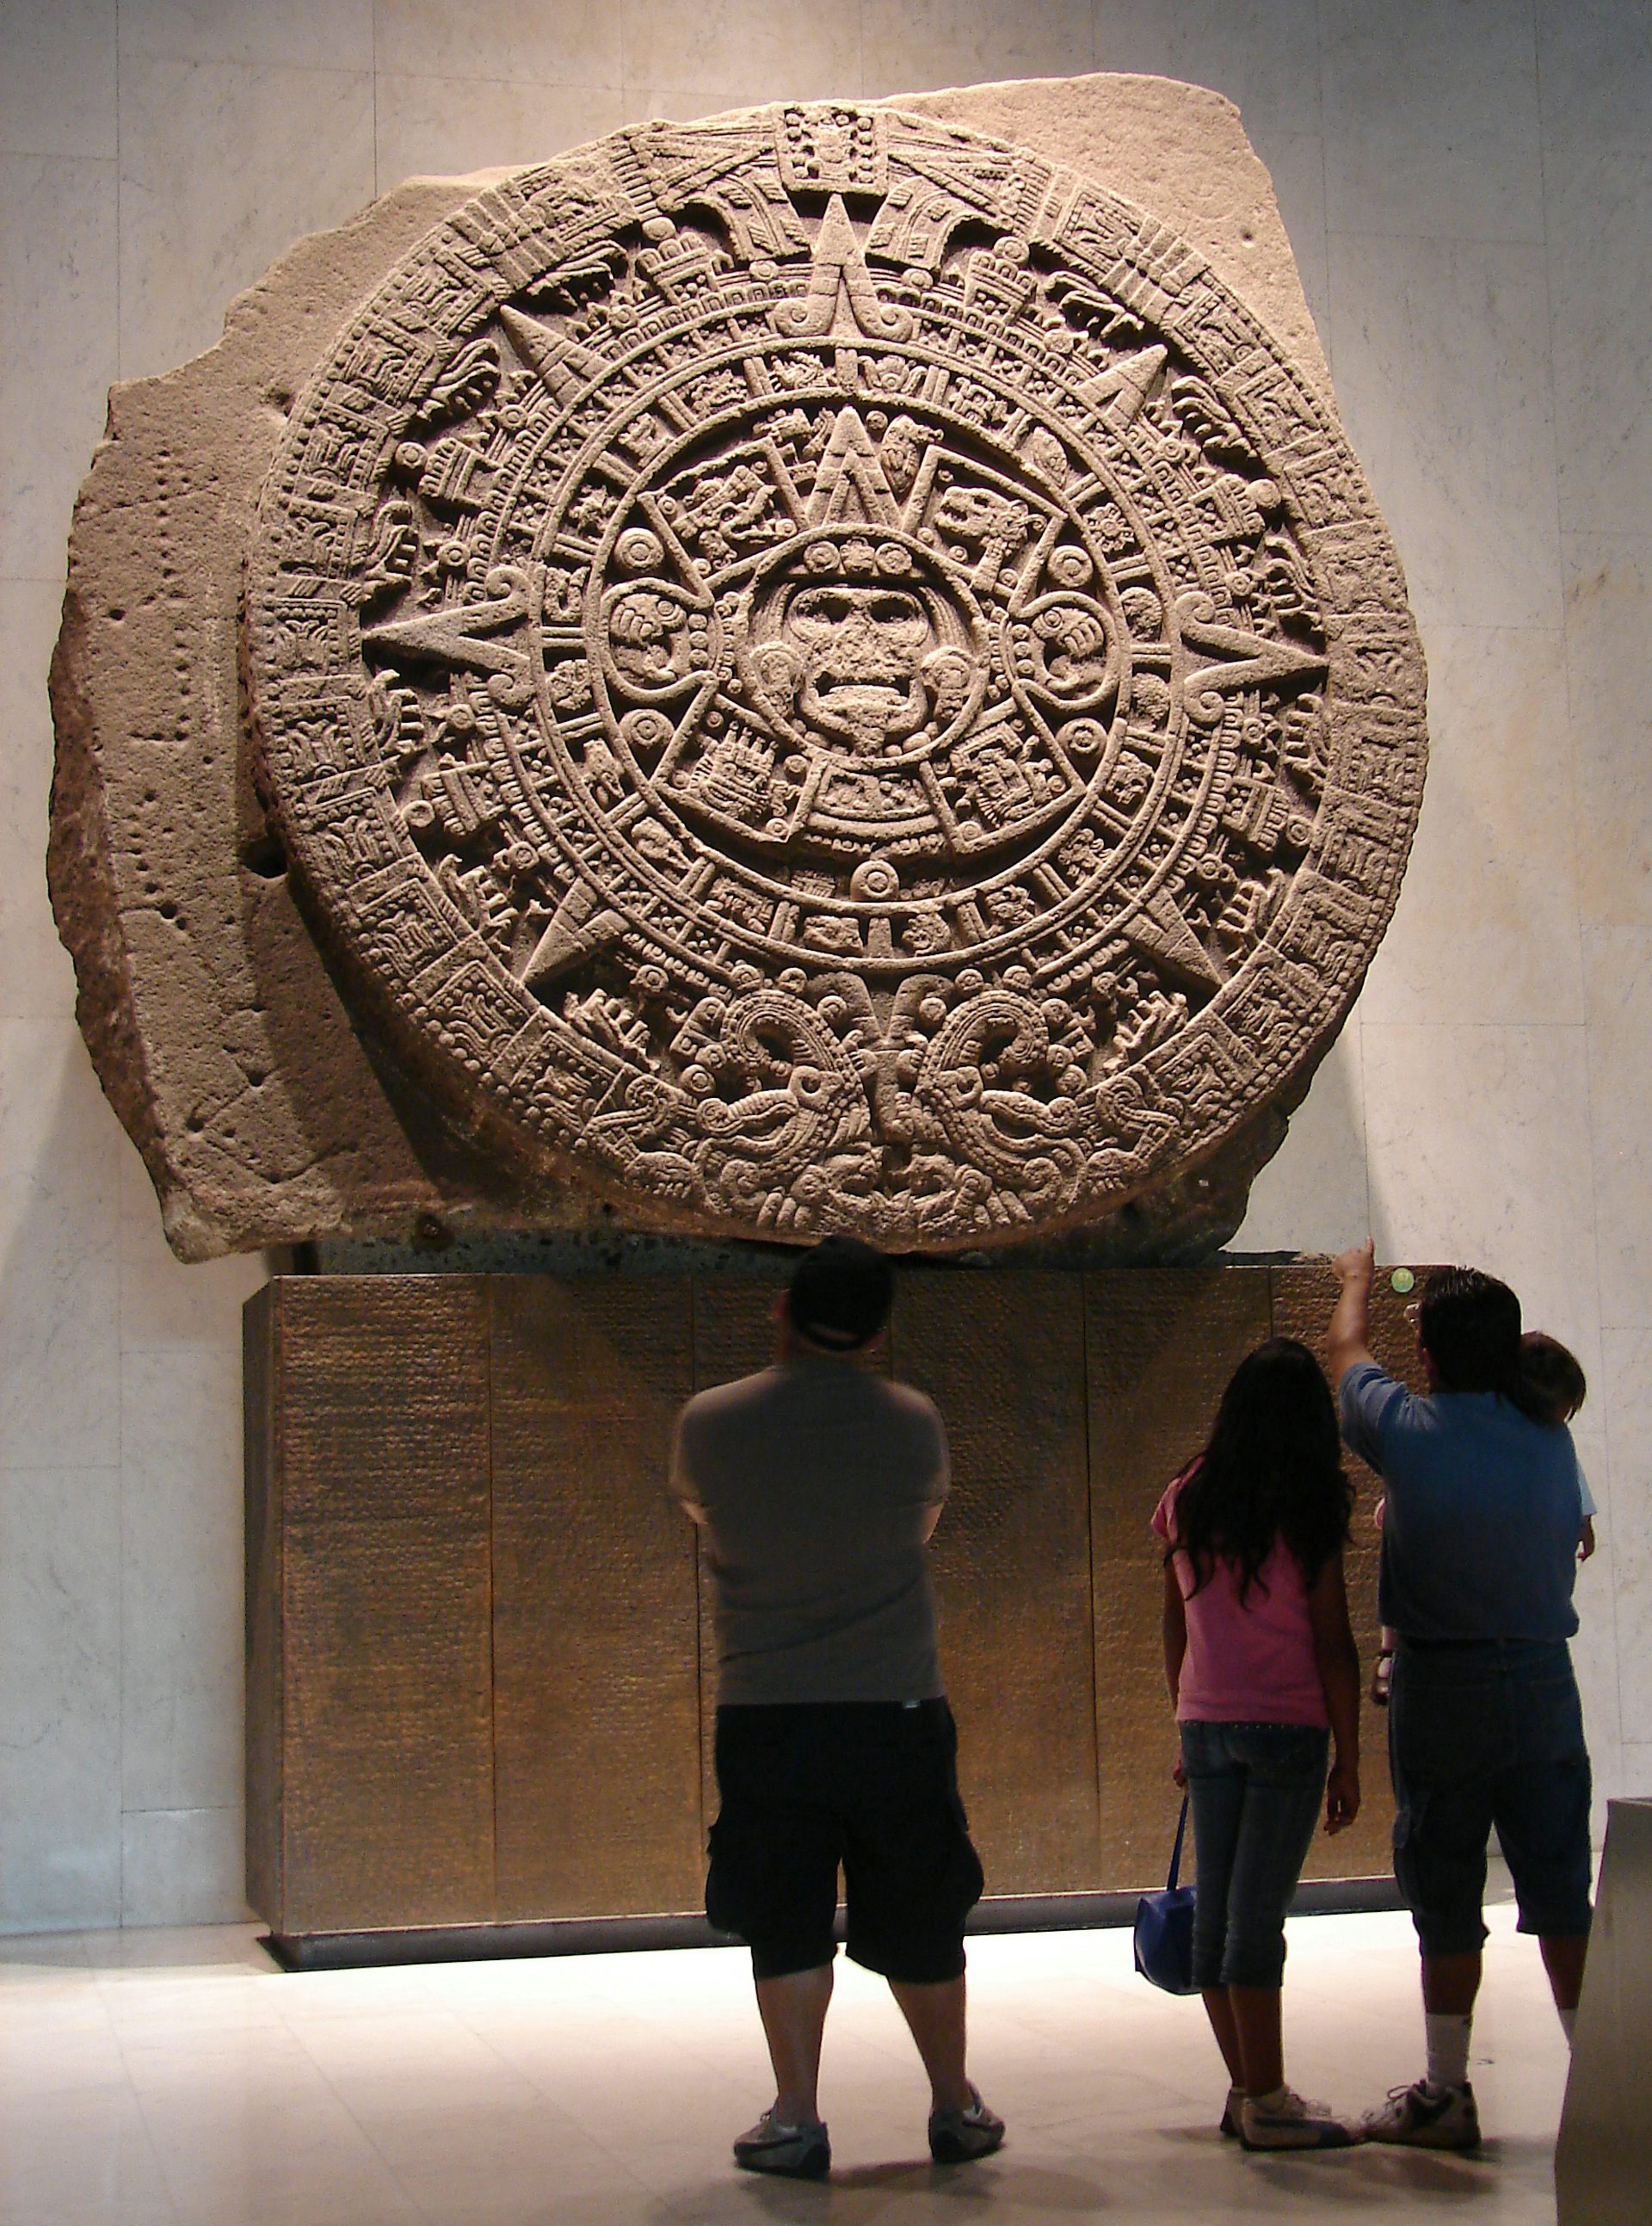 Aztec Stone of the Sun at National Anthropology Museum in Mexico City